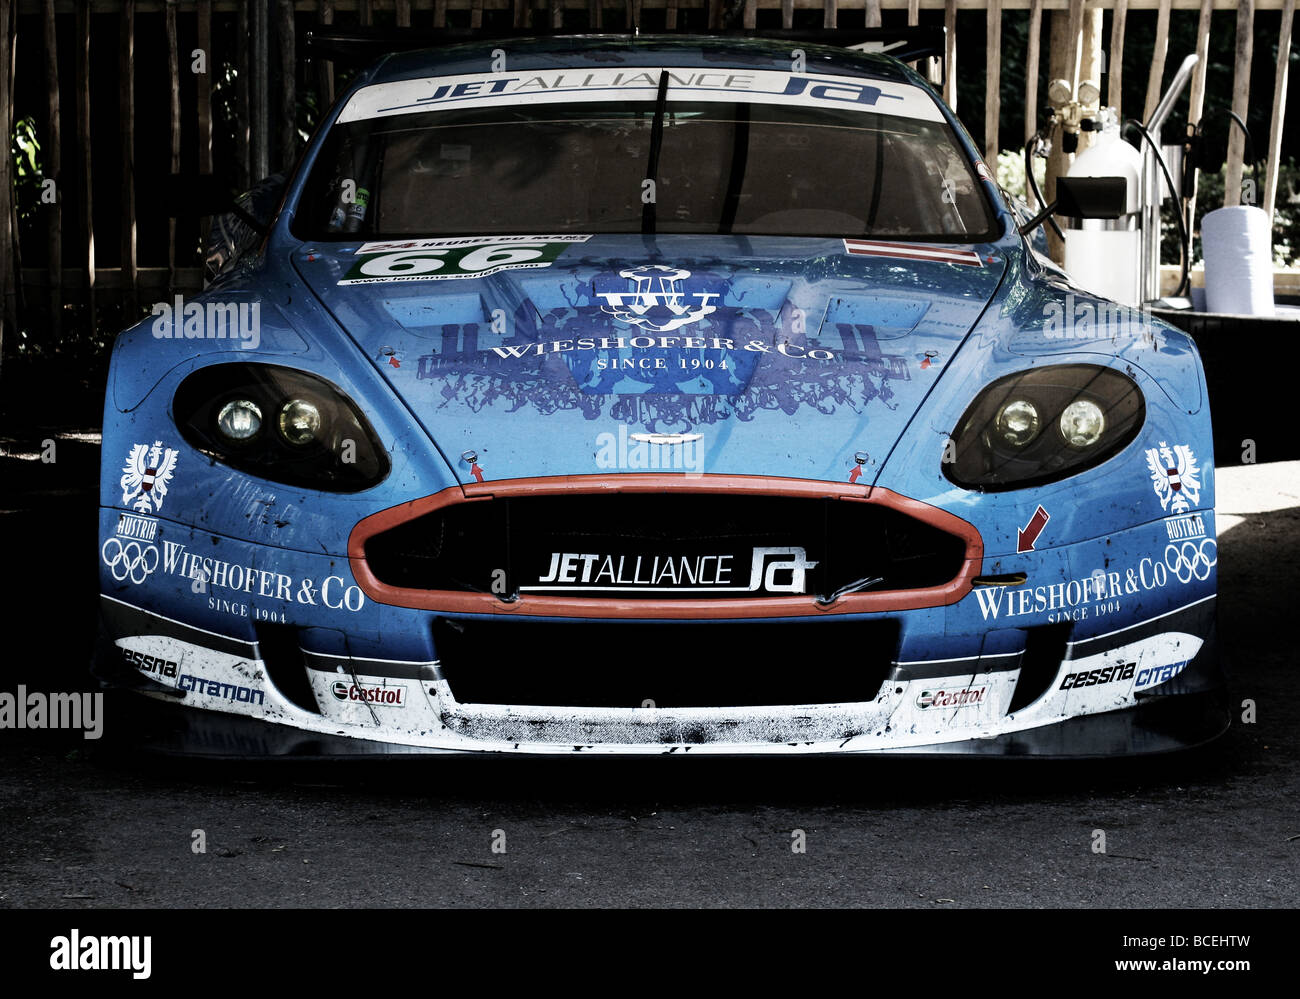 Aston Martin racing car in the pits Stock Photo